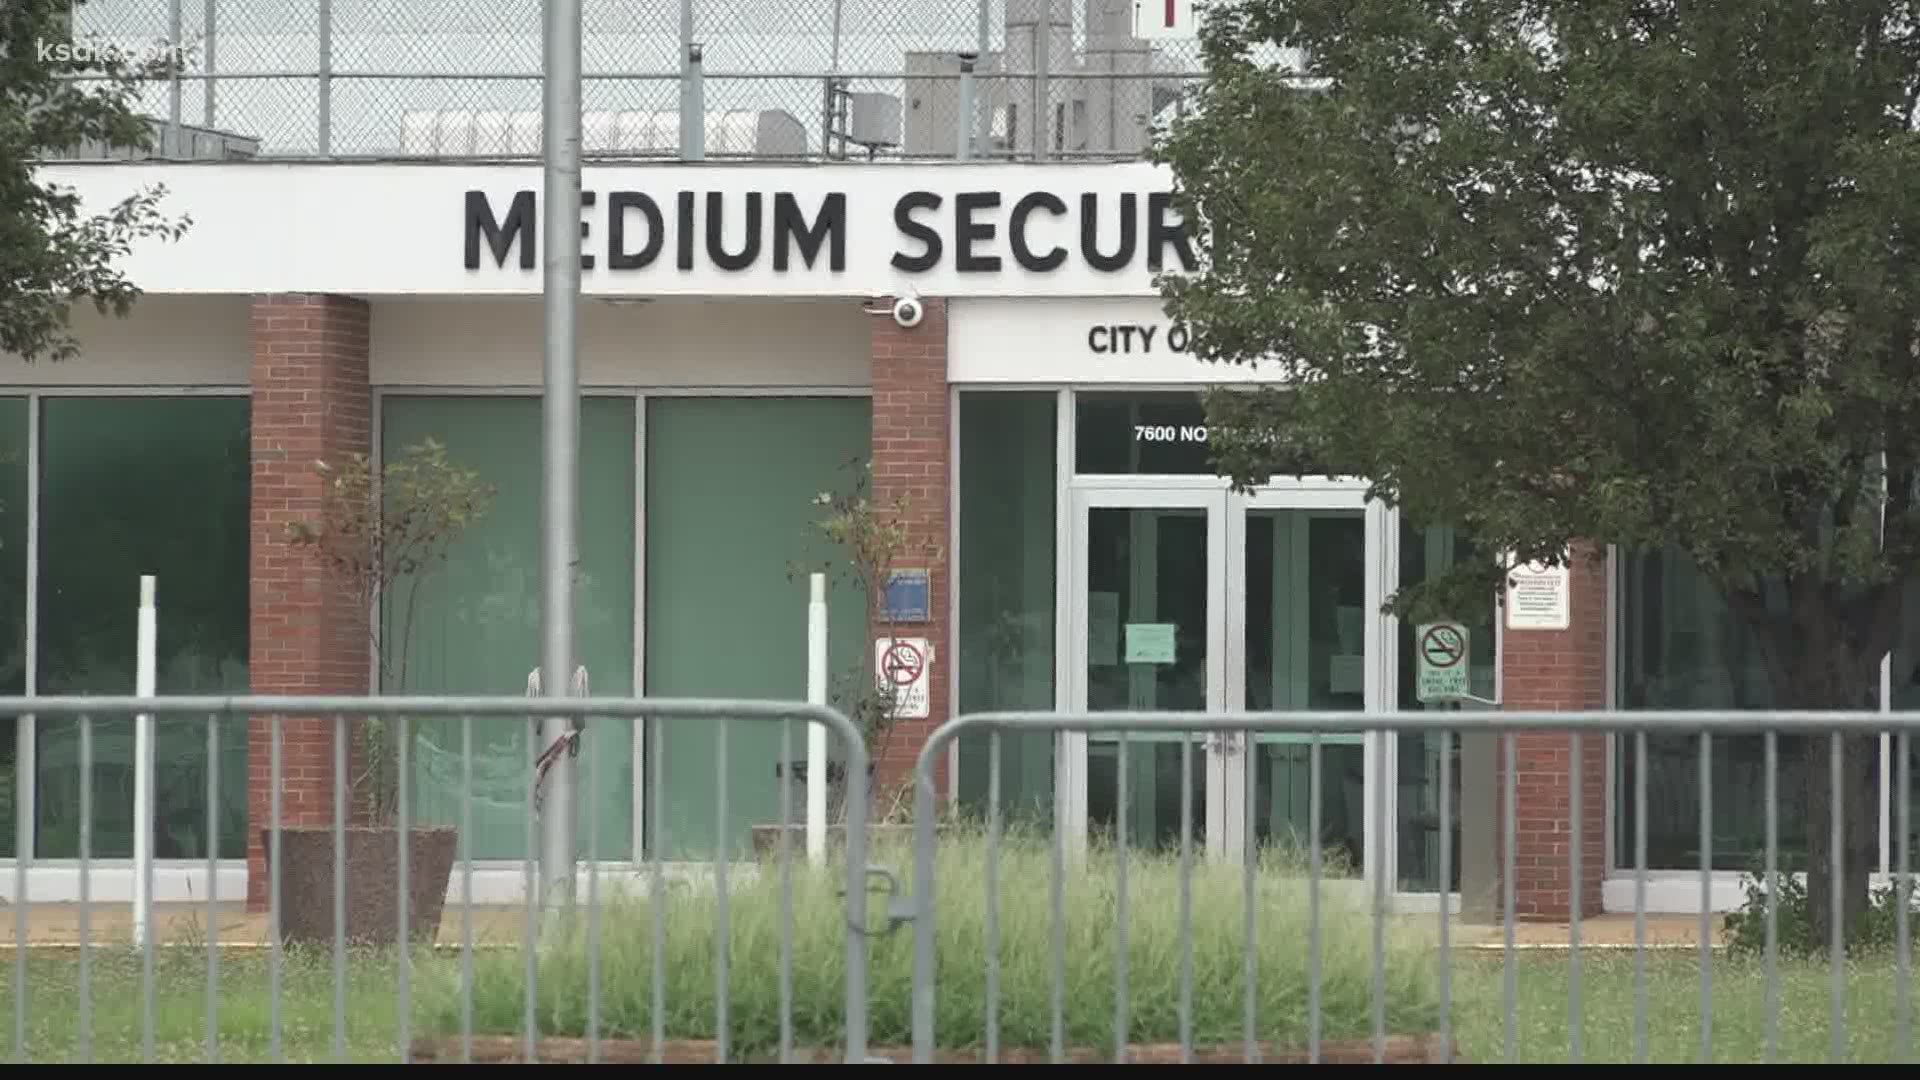 Detainees formerly held at the MSI facility have been moved to the CJC. The "Workhouse" is closed.